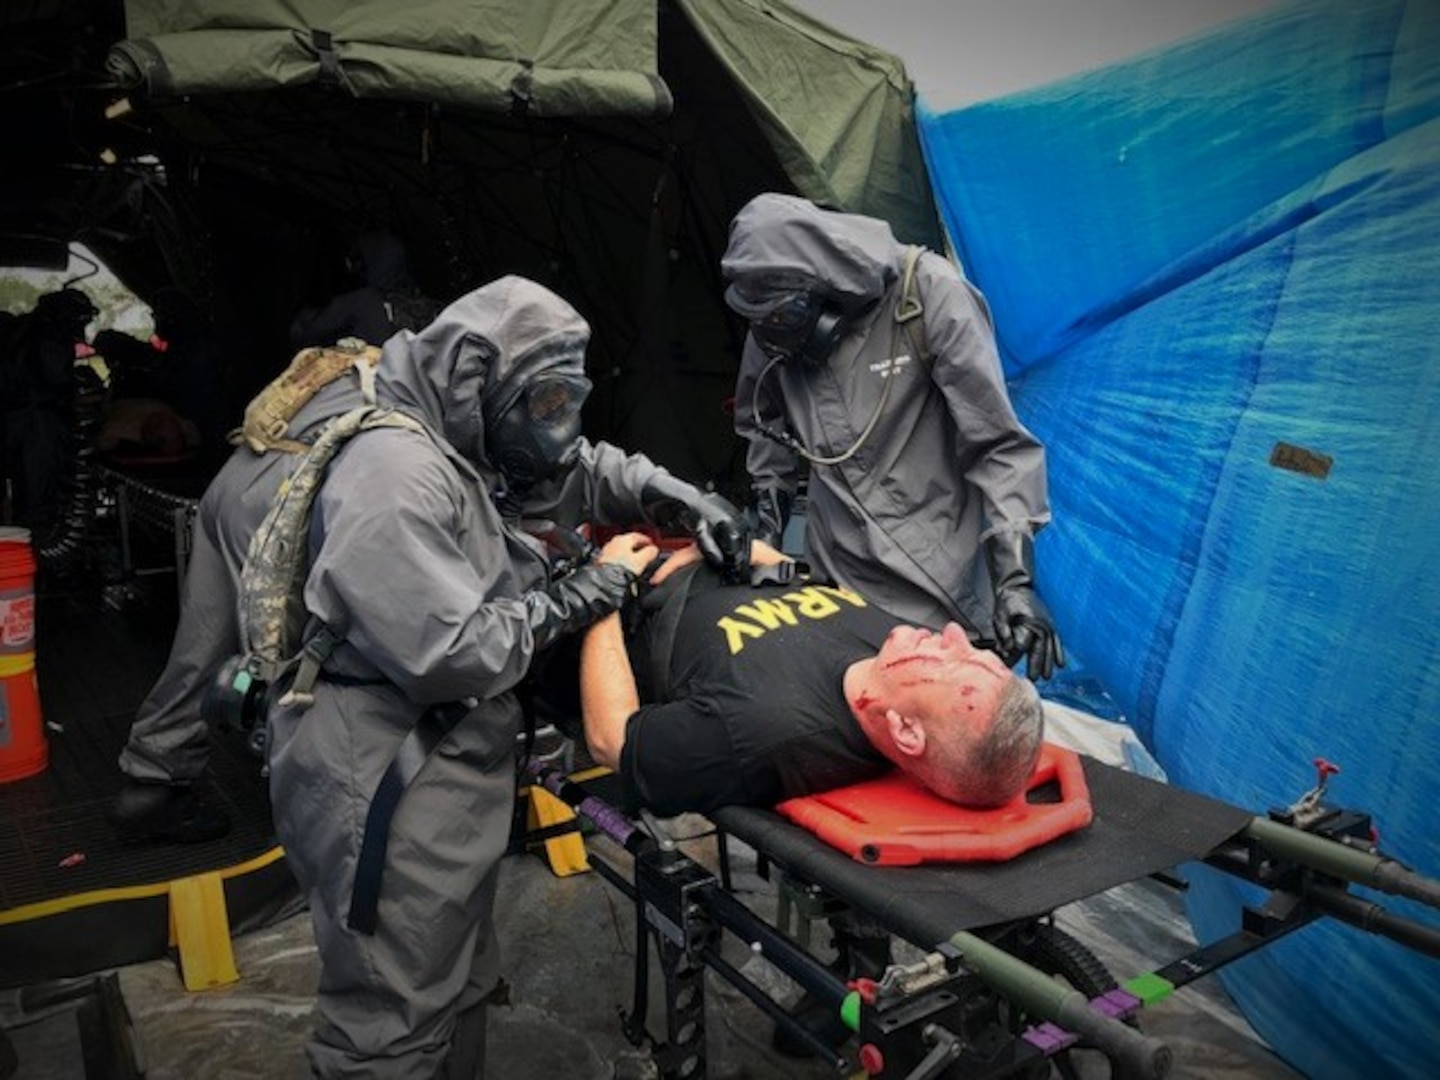 A decontamination team of Airmen and Soldiers care for casualties in a simulated mass casualty decontamination line during the 503rd Military Police Battalion field training exercise at Camp Blanding, Fla., on Oct. 24, 2018. Army Maj. Gen. William “Bill” Hall participates as a mock victim of a chemical, biological, radiological and nuclear catastrophe. (Courtesy photo by Navy Chief Petty Officer Zach McKinley)